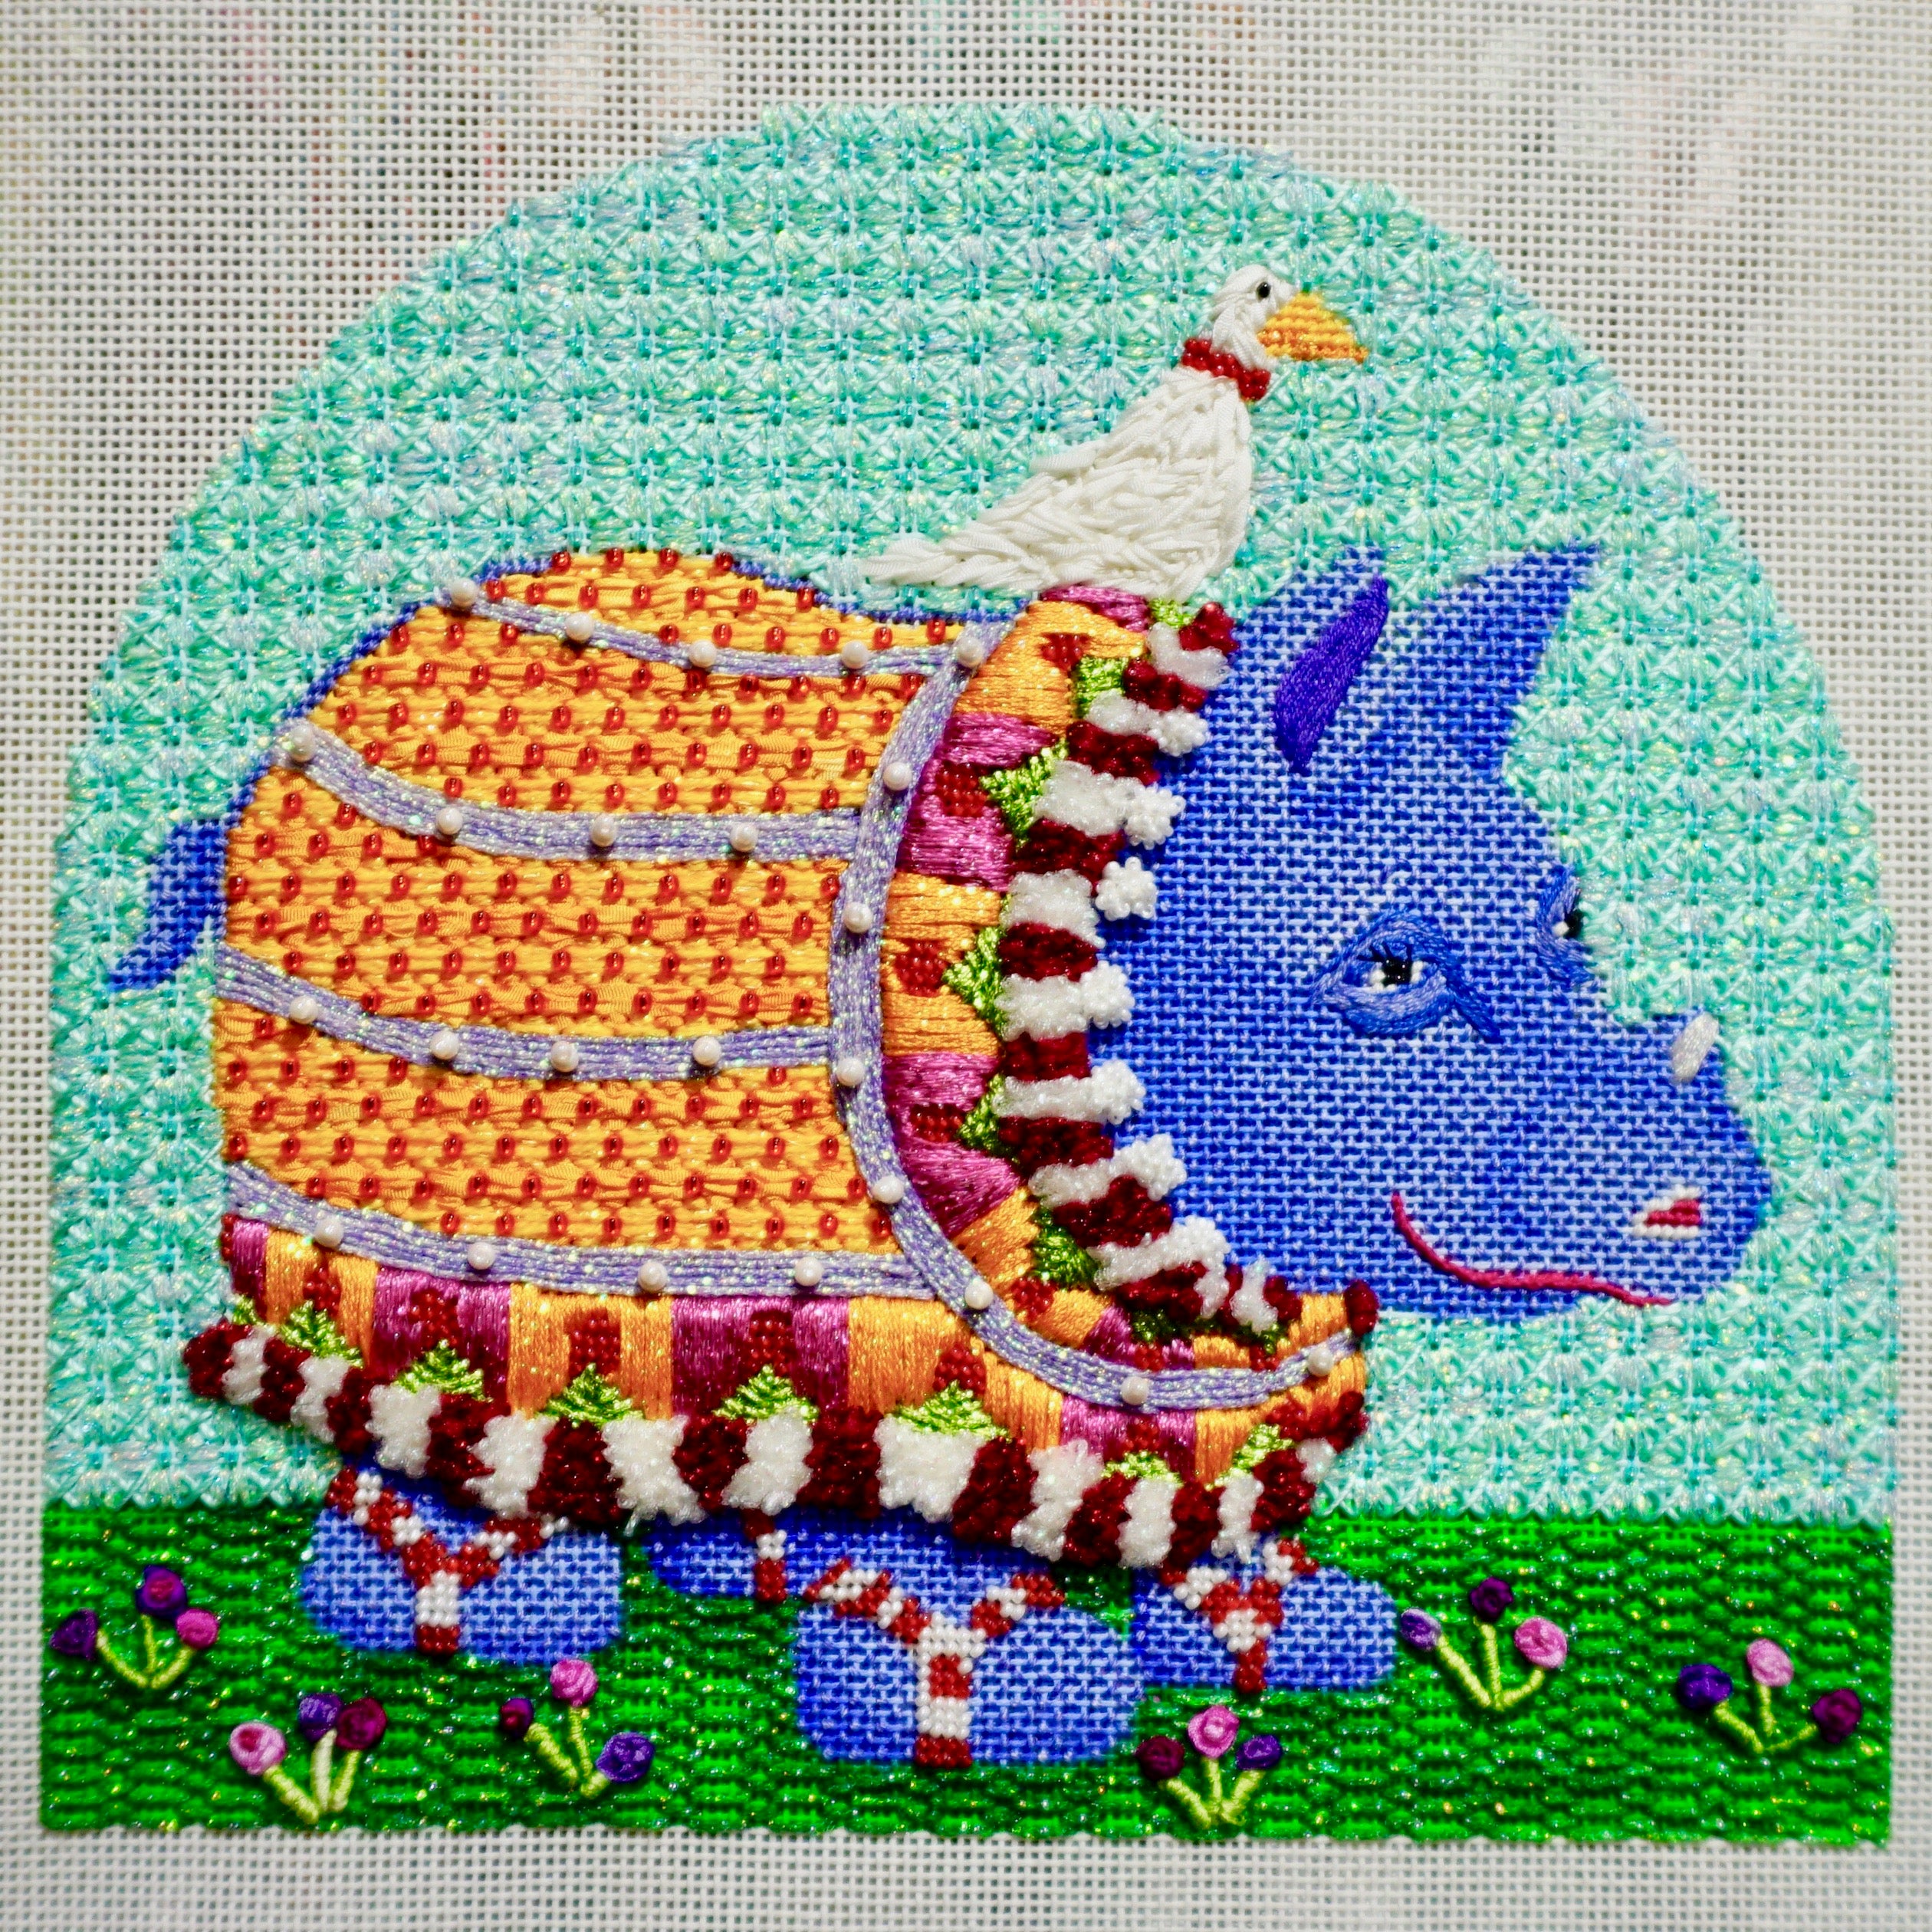 Ralph the Rhino Stitch Guide - The Flying Needles